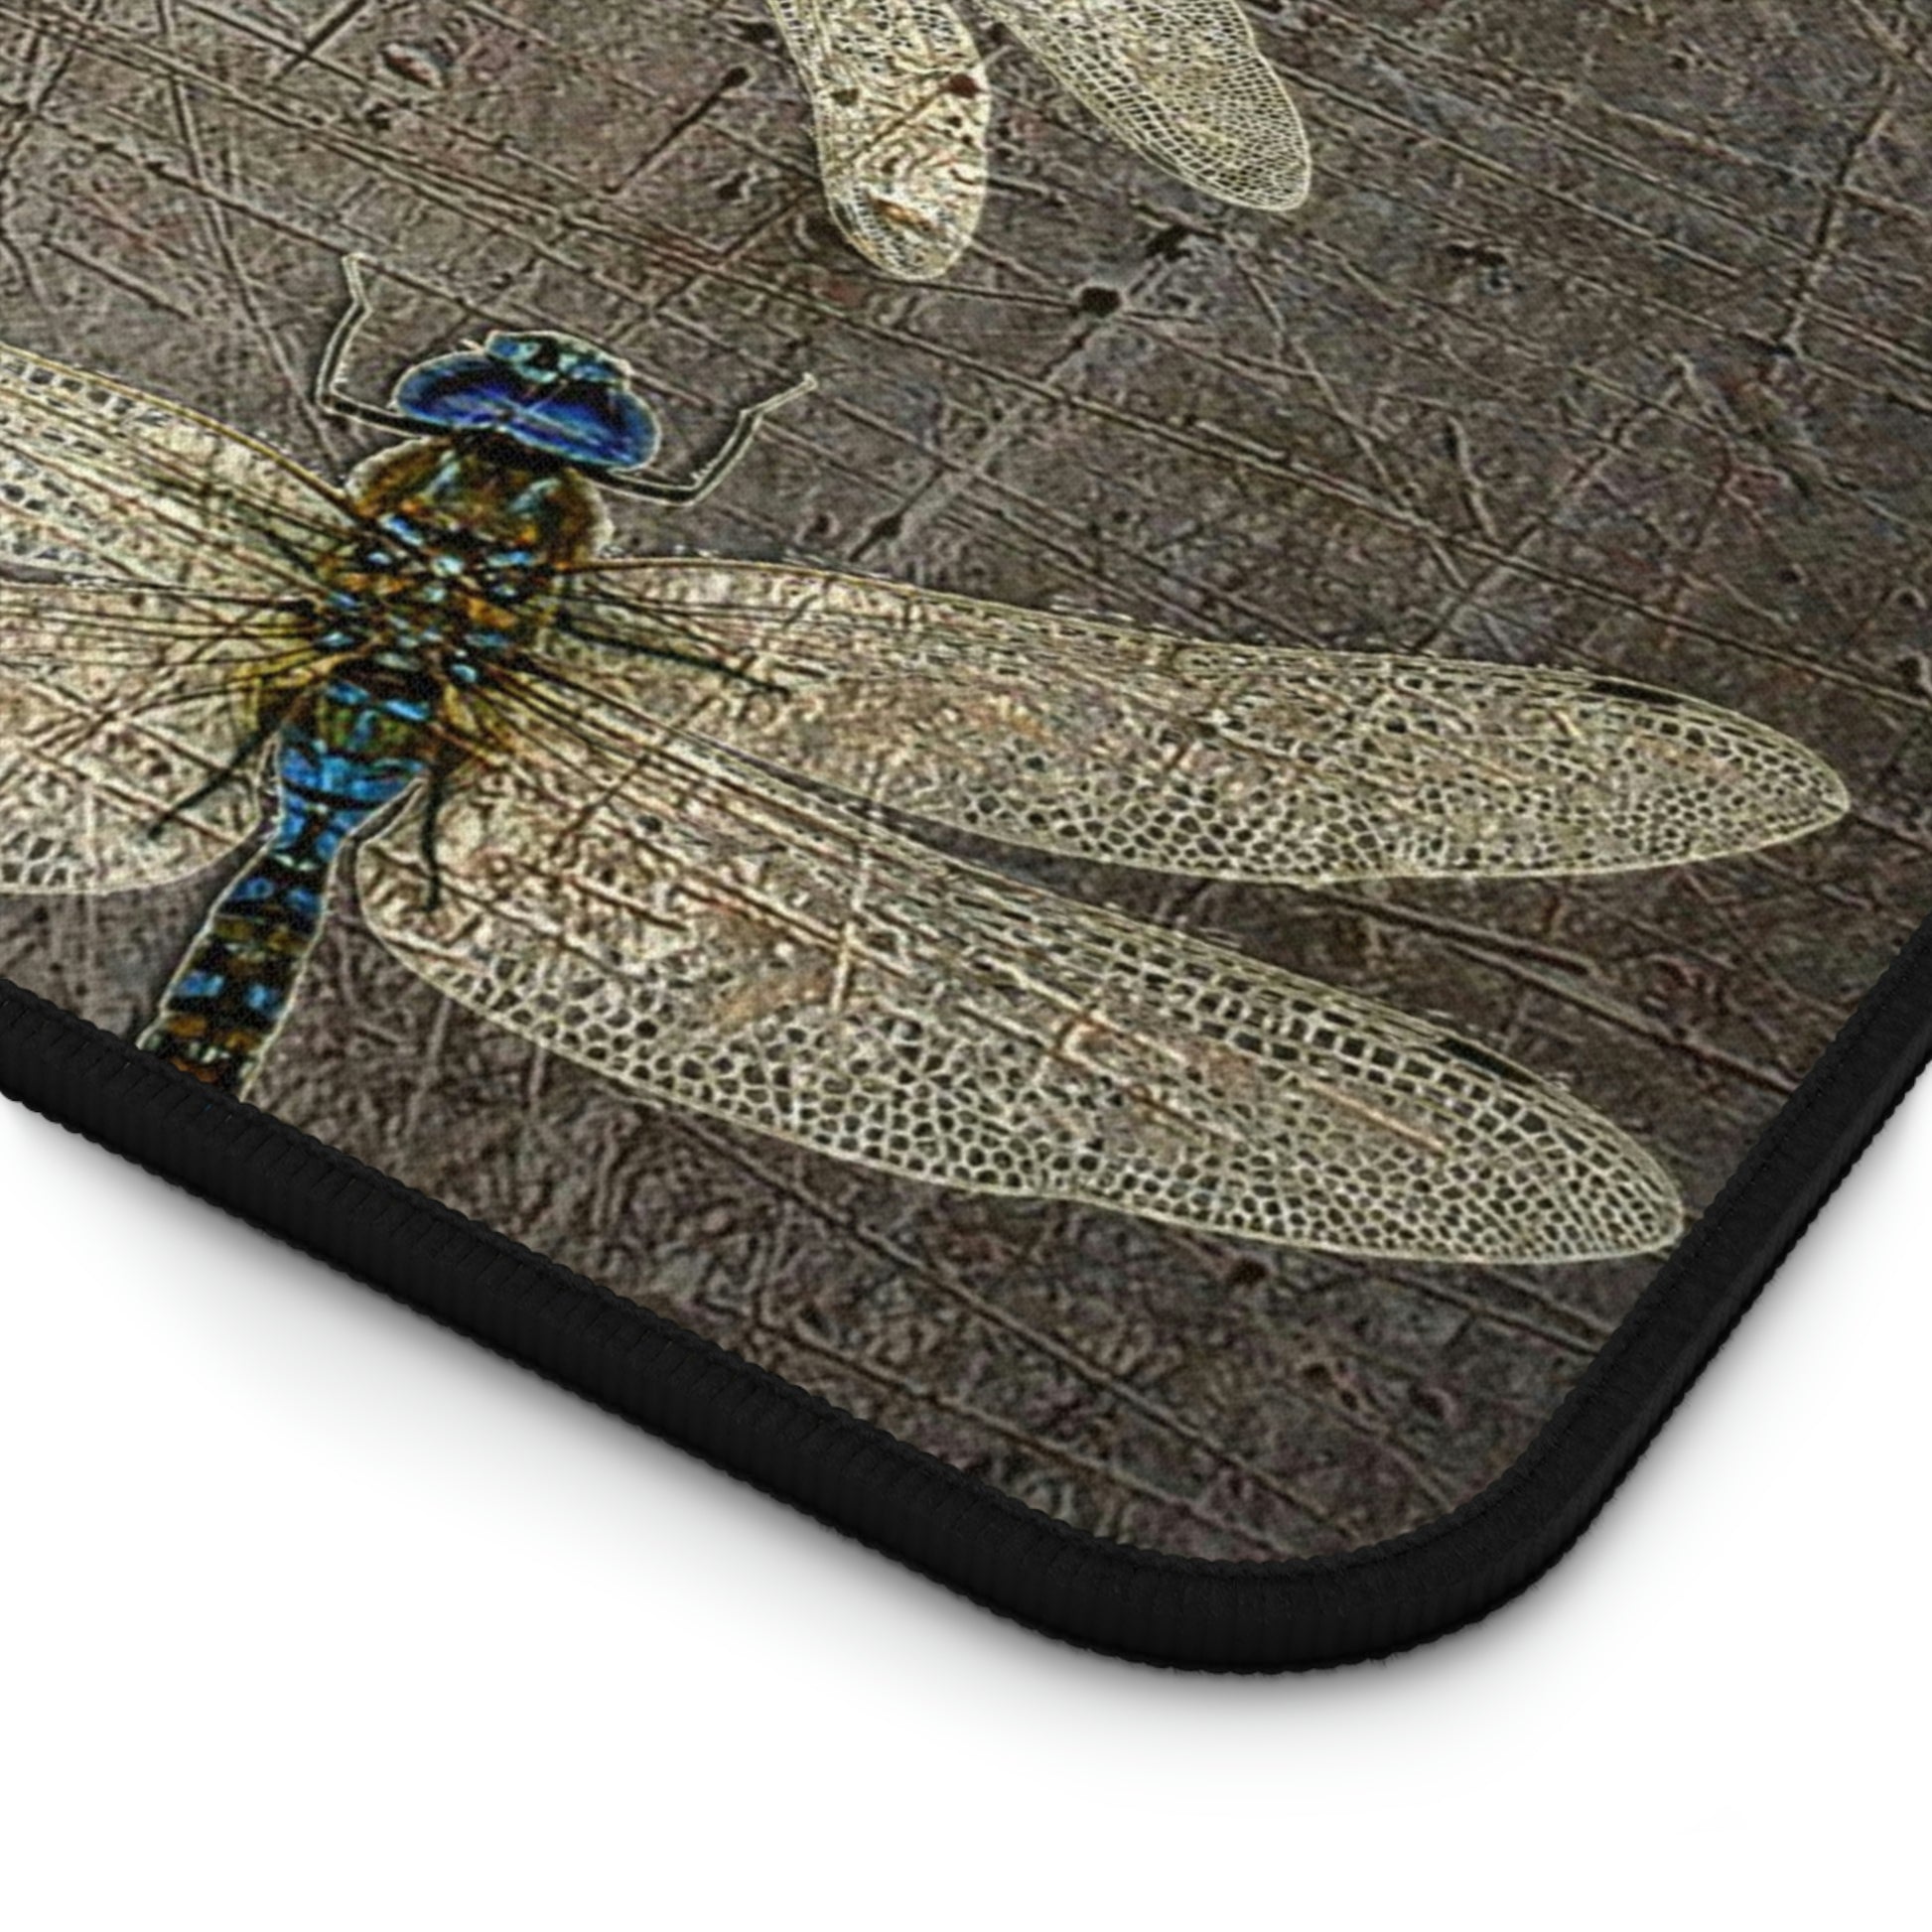 Dragonfly Desk Mat - Flight of Dragonflies on Distressed Grey Background Print 12x22 close up